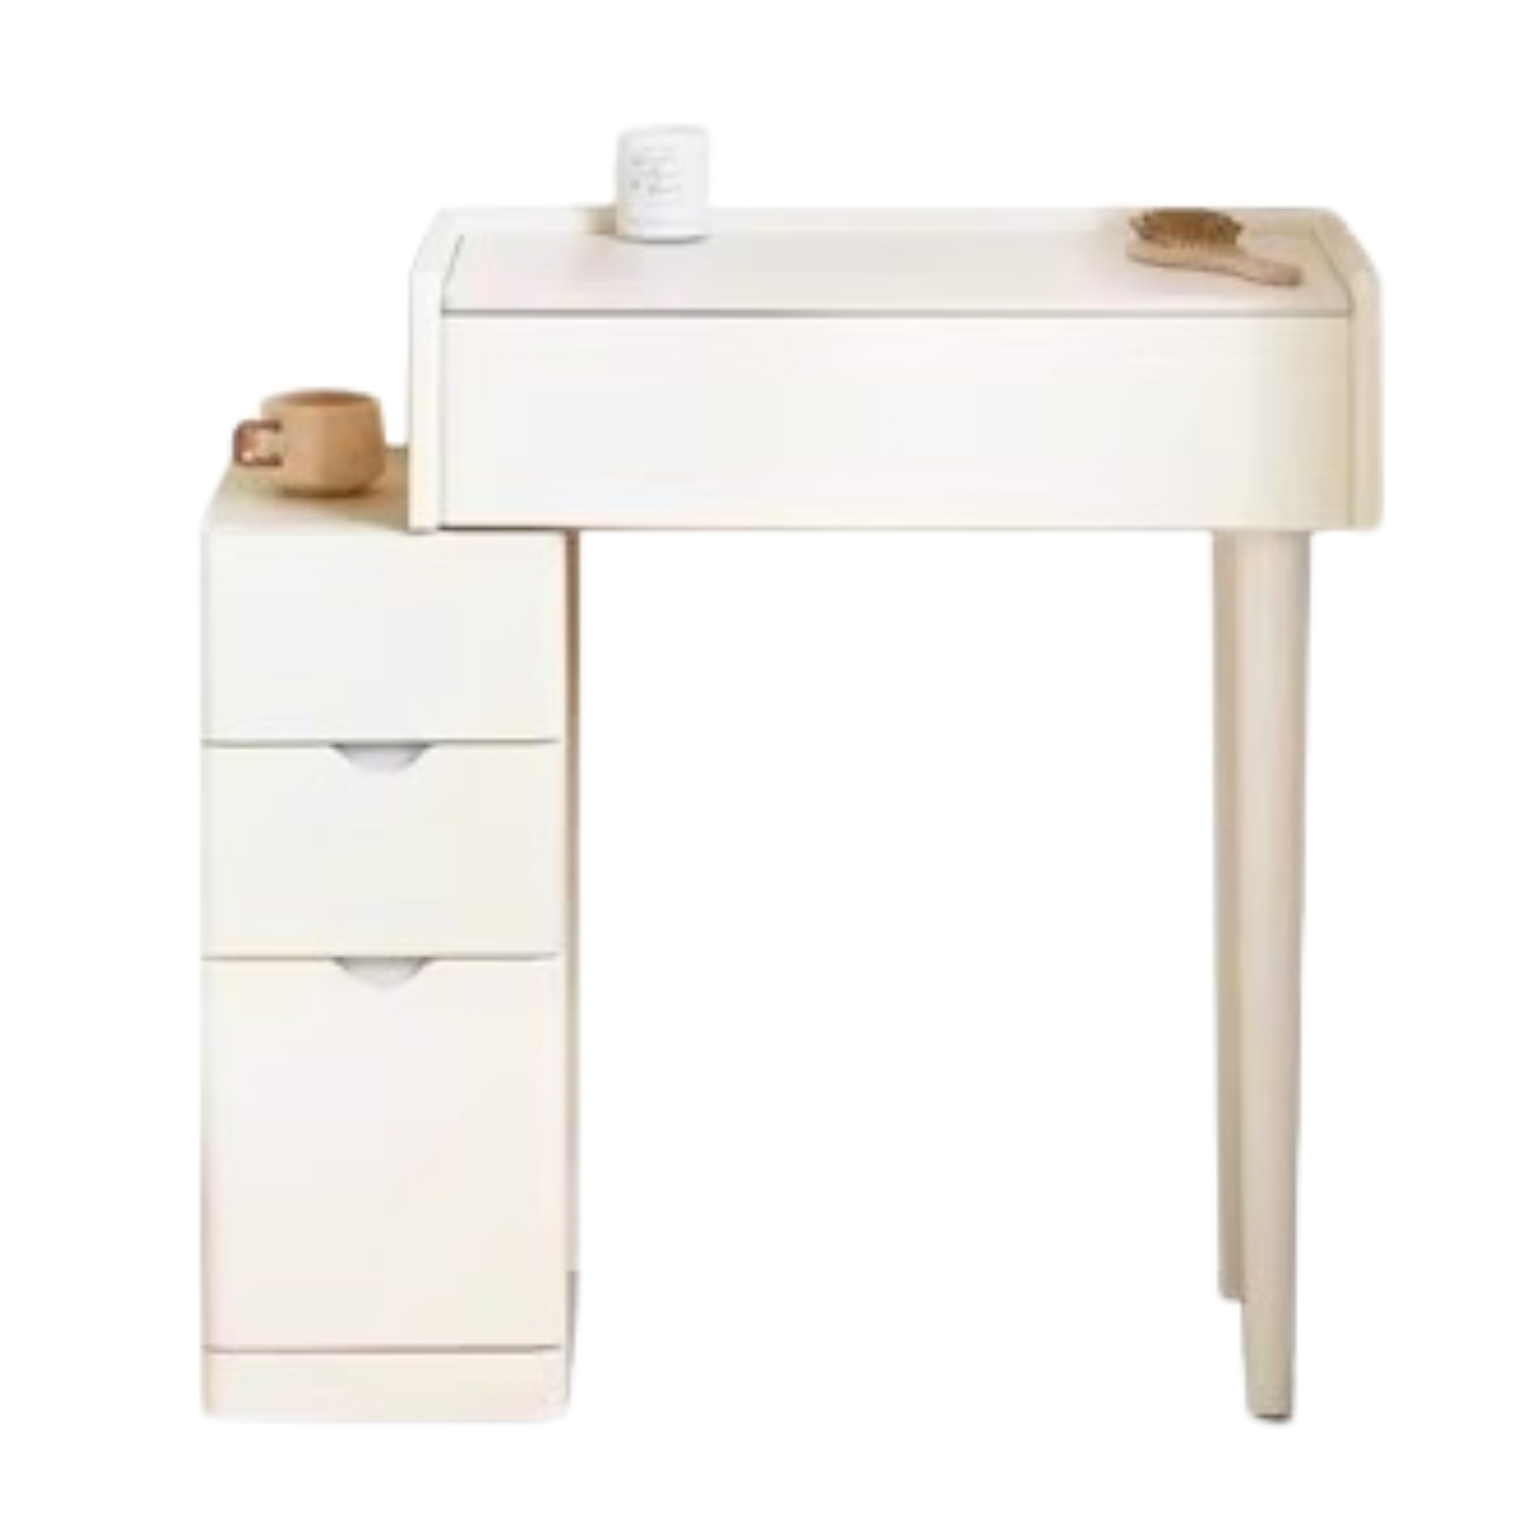 Beech Solid Wood Makeup Table Cream Style: